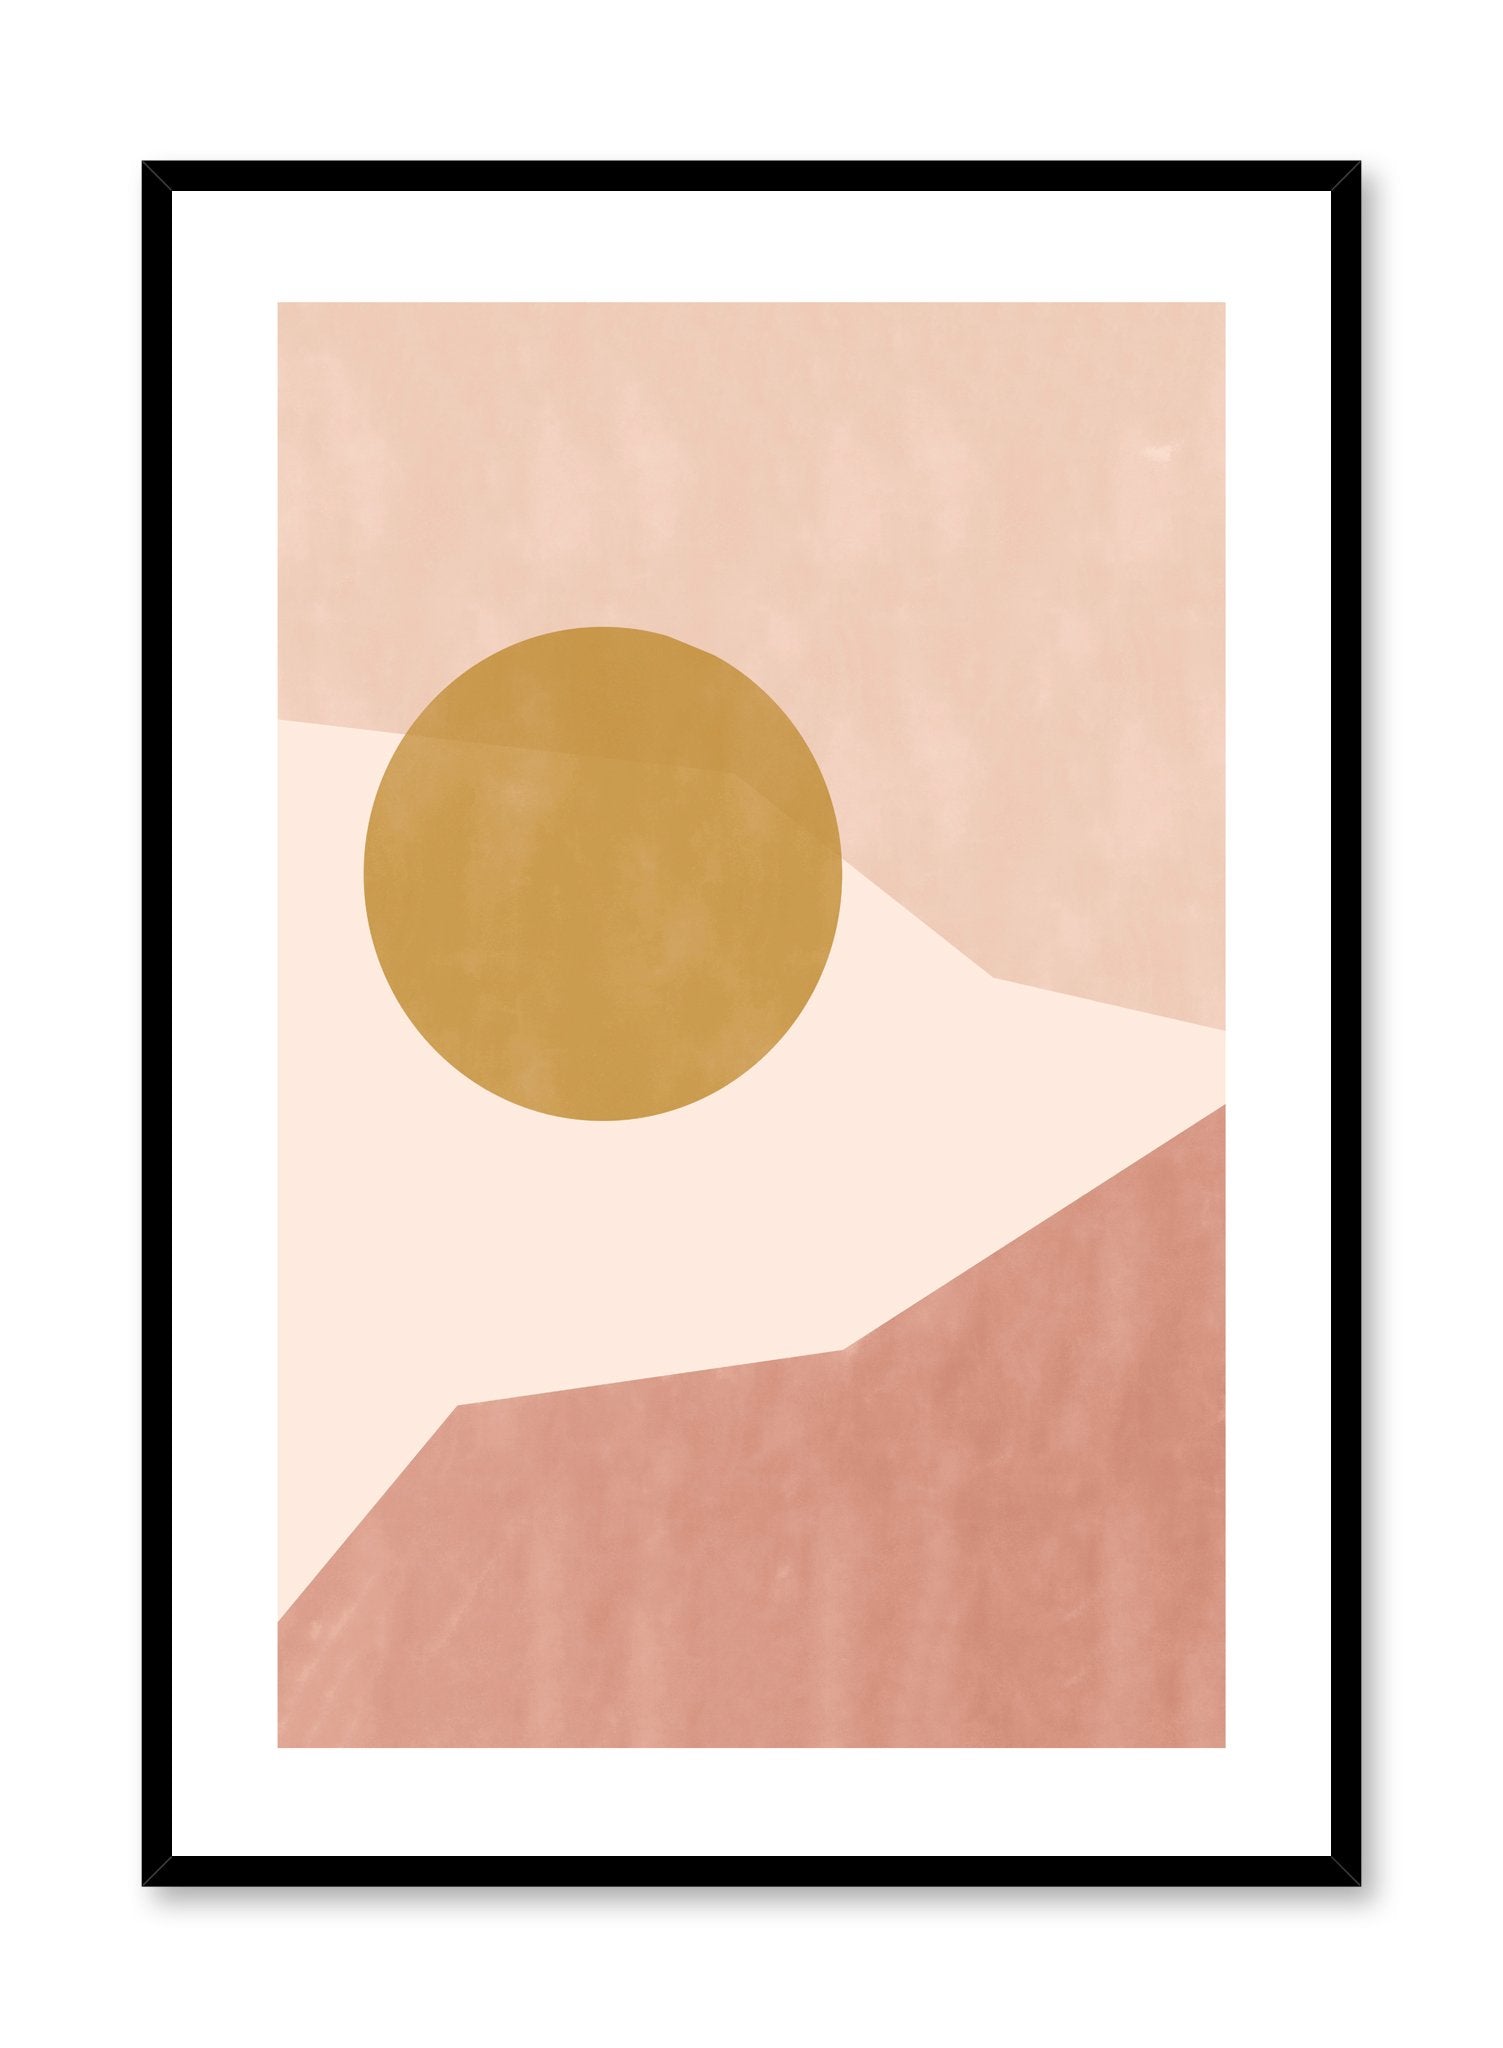 Modern abstract illustration poster by Opposite Wall with angled shapes in terracotta beige by Toffie Affichiste